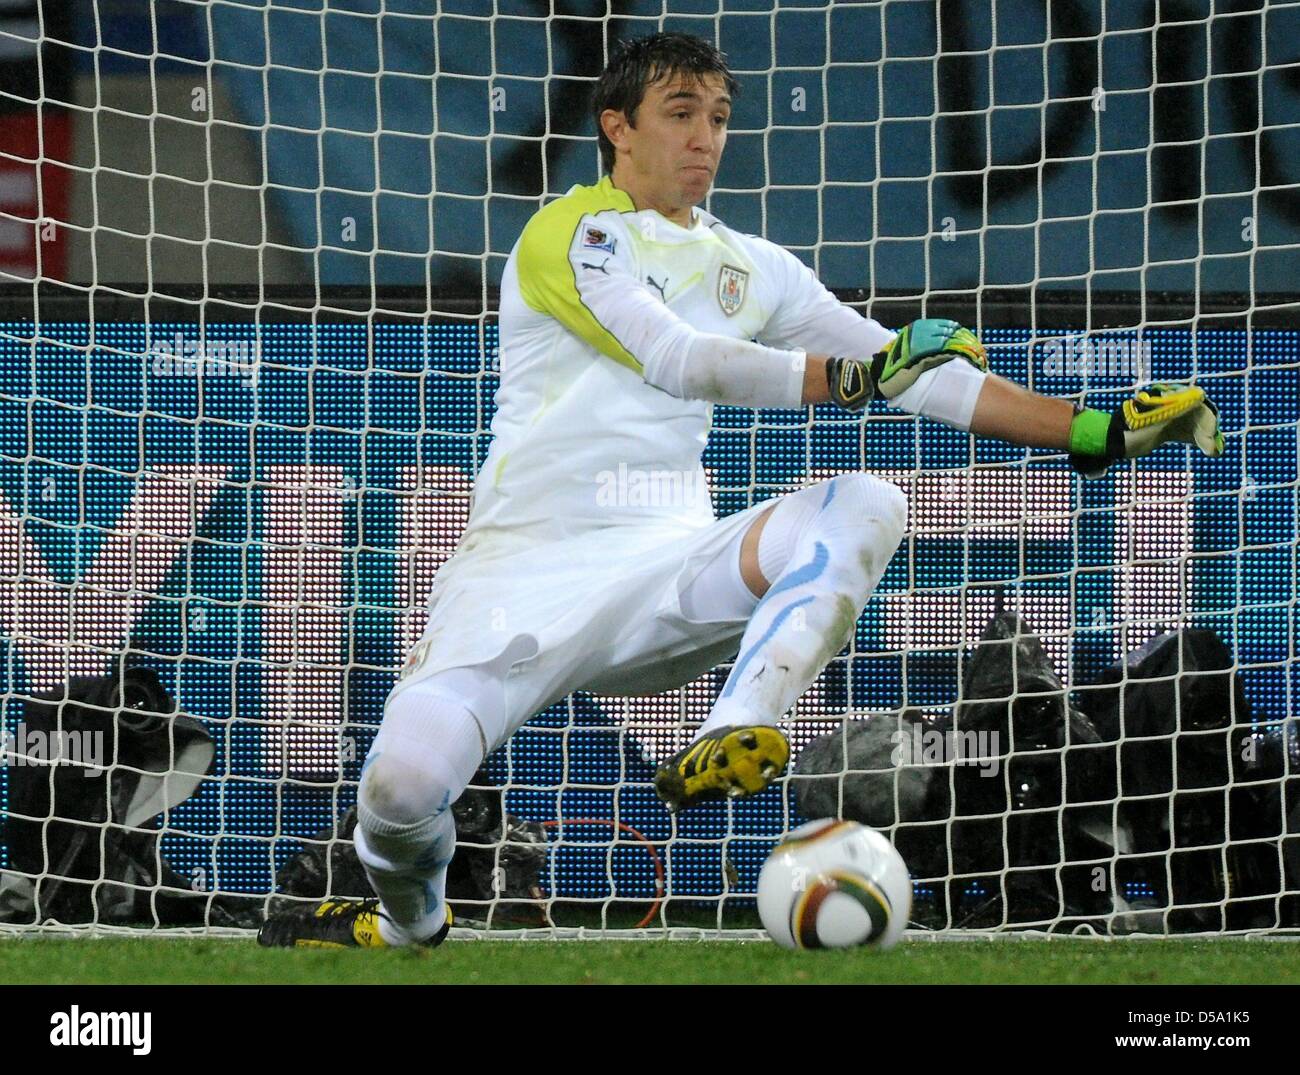 Uruguay's goalkeeper Fernando Muslera in action during the 2010 FIFA World Cup third place match between Uruguay and Germany at the Nelson Mandela Bay Stadium in Port Elizabeth, South Africa 10 July 2010. Germany won 3:2. Photo: Marcus Brandt dpa - Please refer to http://dpaq.de/FIFA-WM2010-TC Stock Photo